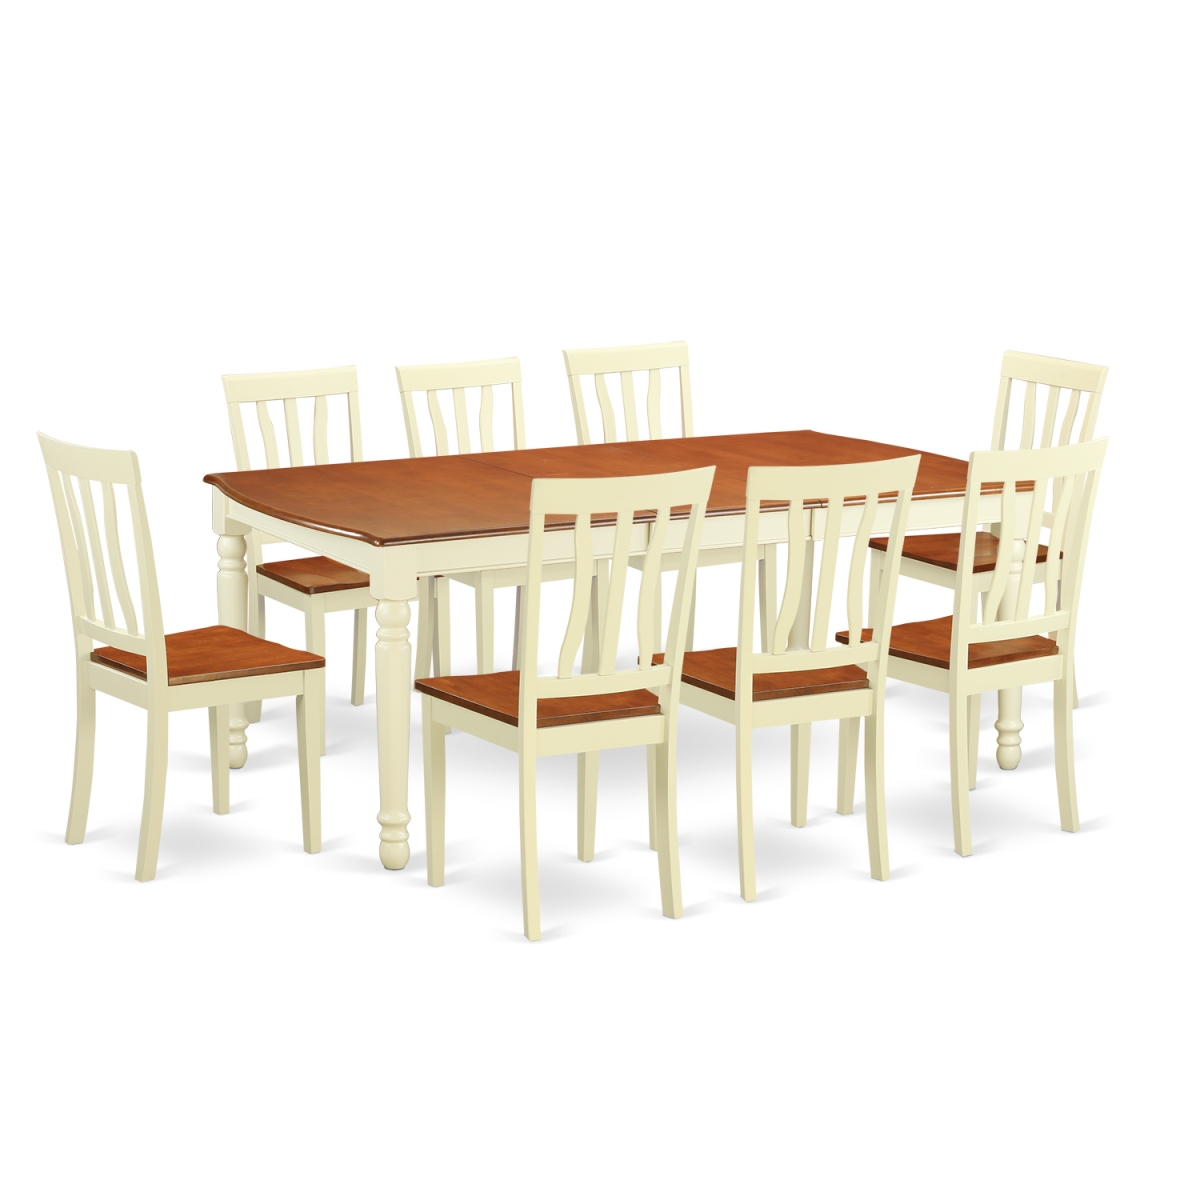 Doan9-whi-w Dinette Set - Table & 8 Chairs, Buttermilk & Cherry - 9 Piece